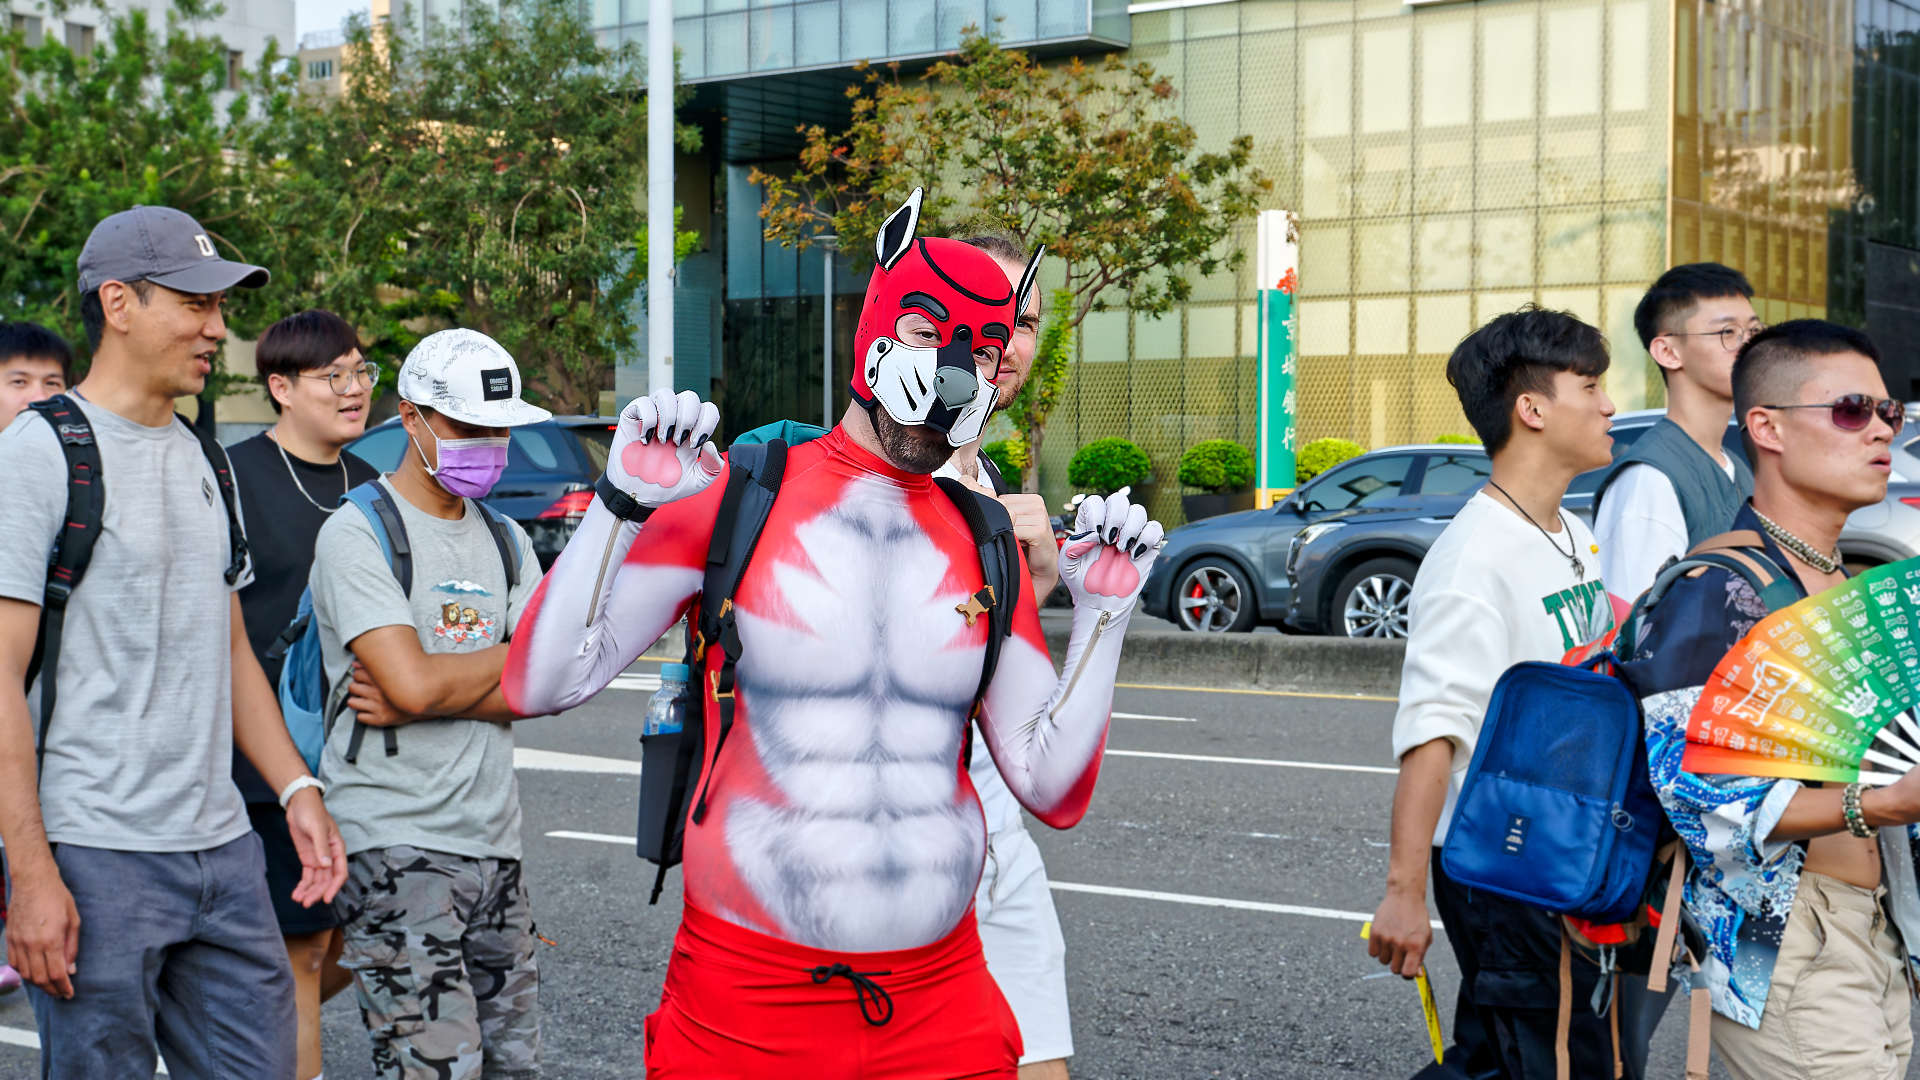 Man dressed as a red pup, posing for the camera.